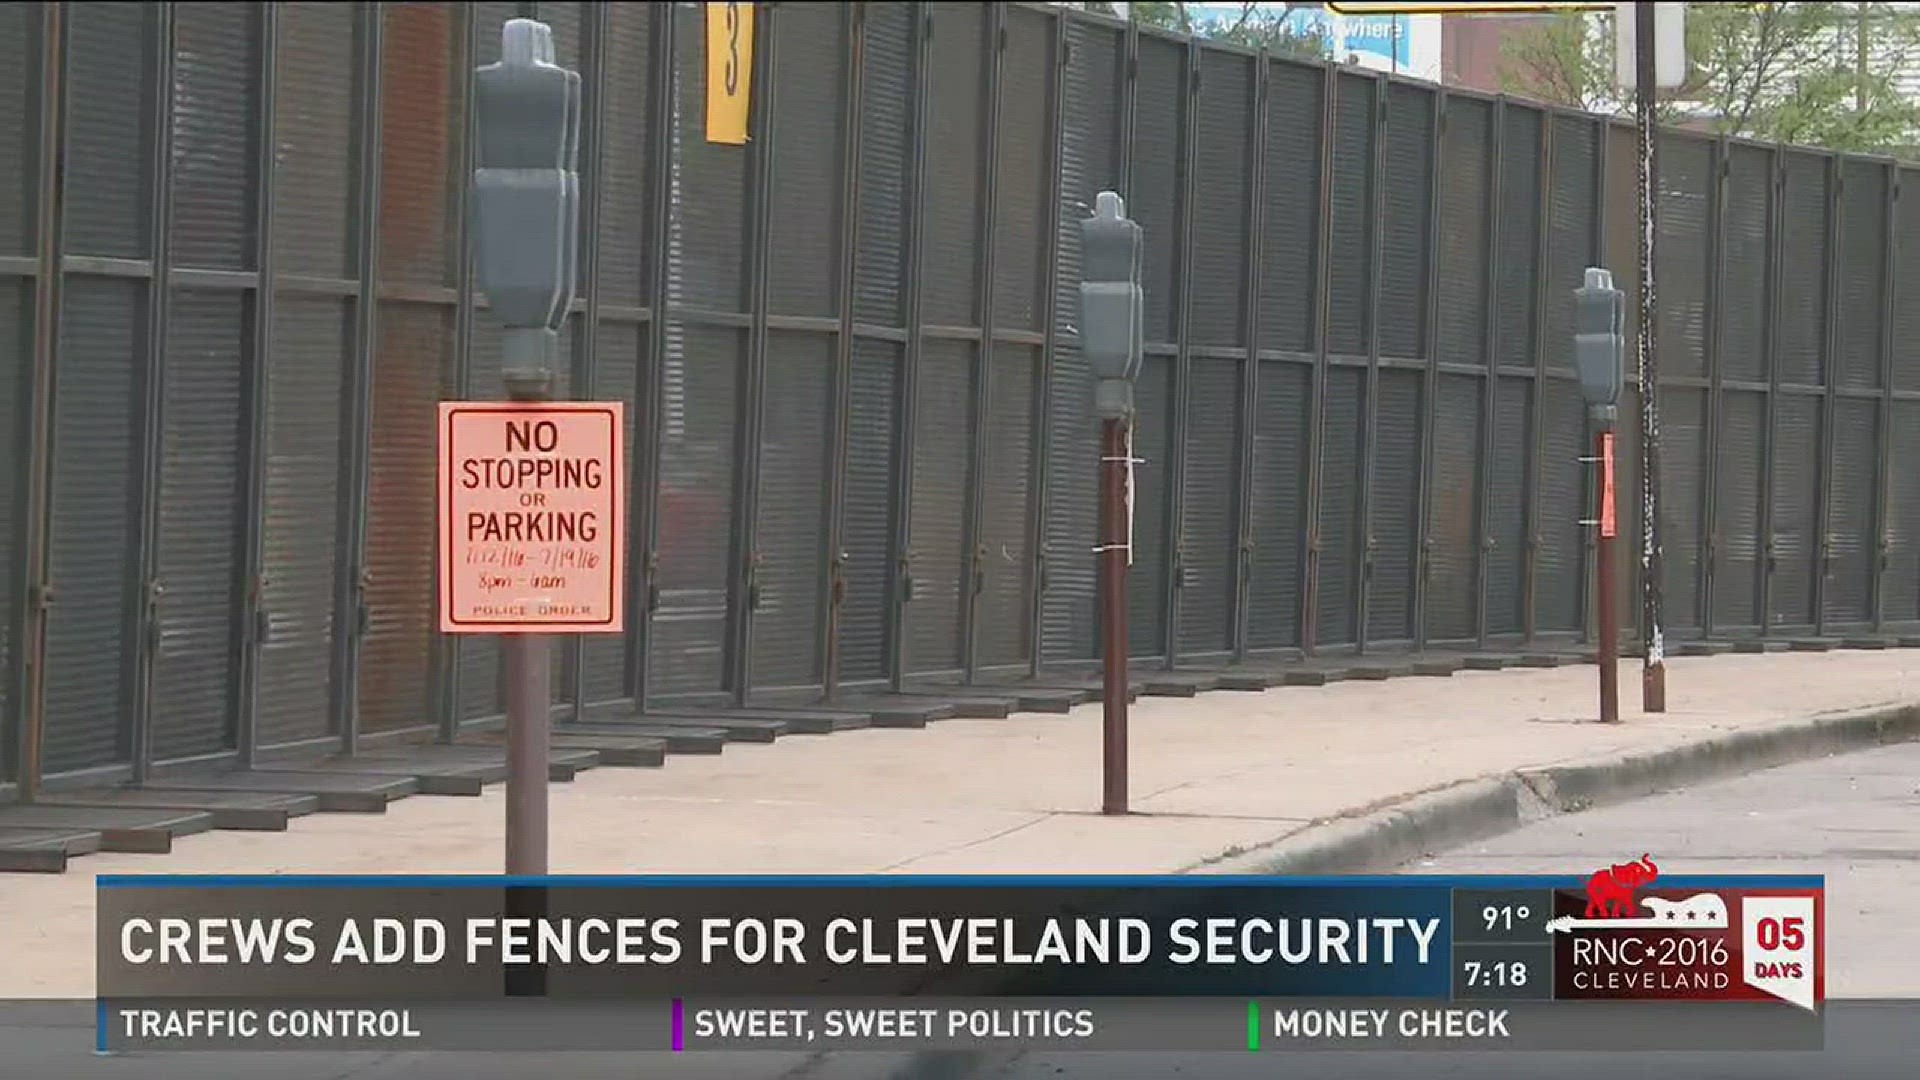 Crews add fences for Cleveland security